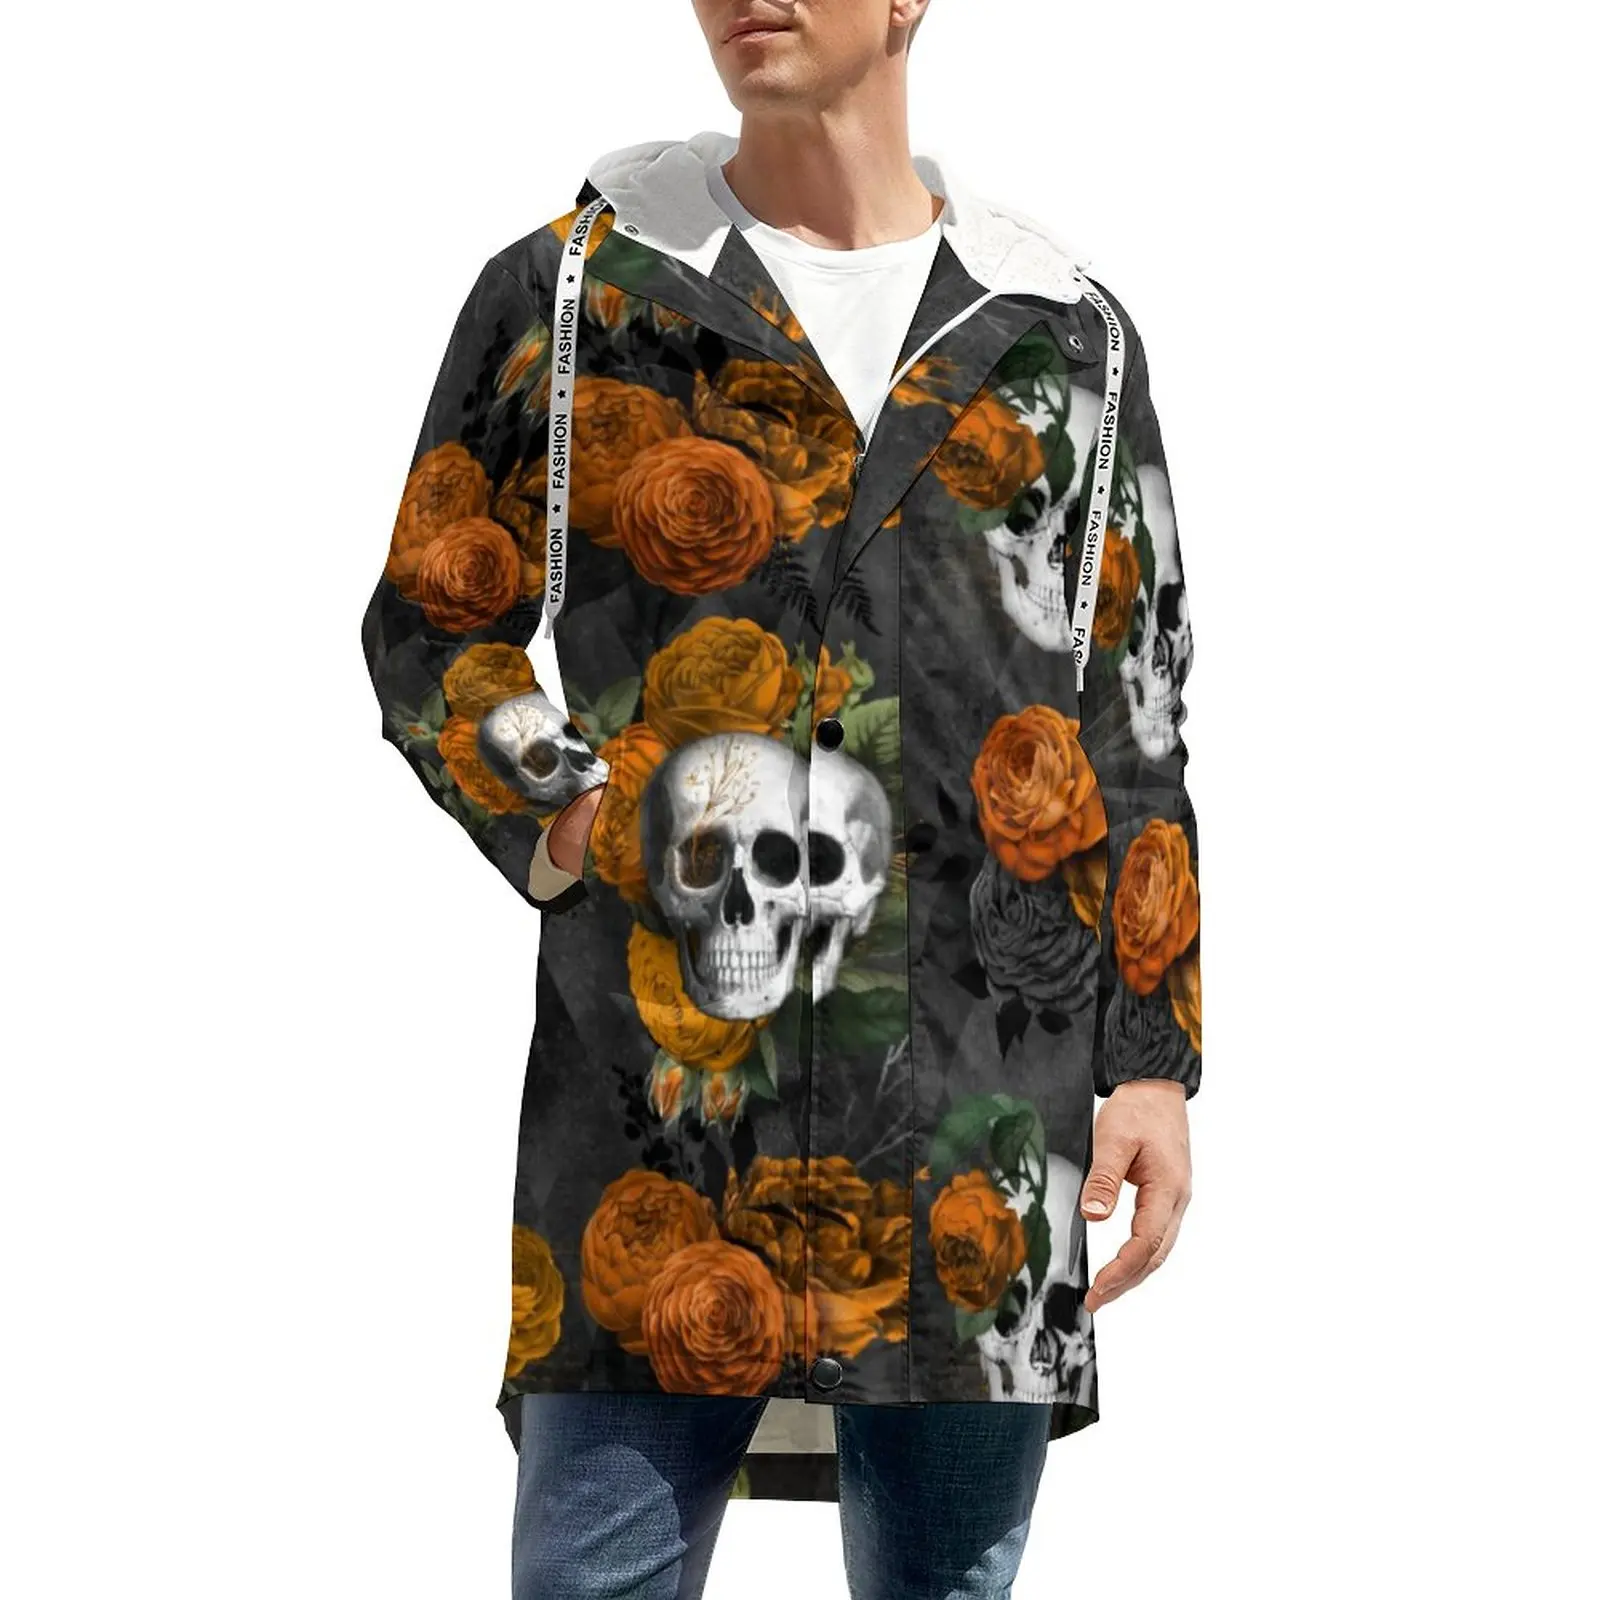 

Vintage Skull Winter Casual Jackets Cute Orange Floral Pretty Hooded Thick Trench Coats Men Graphic Long Windbreak Gift